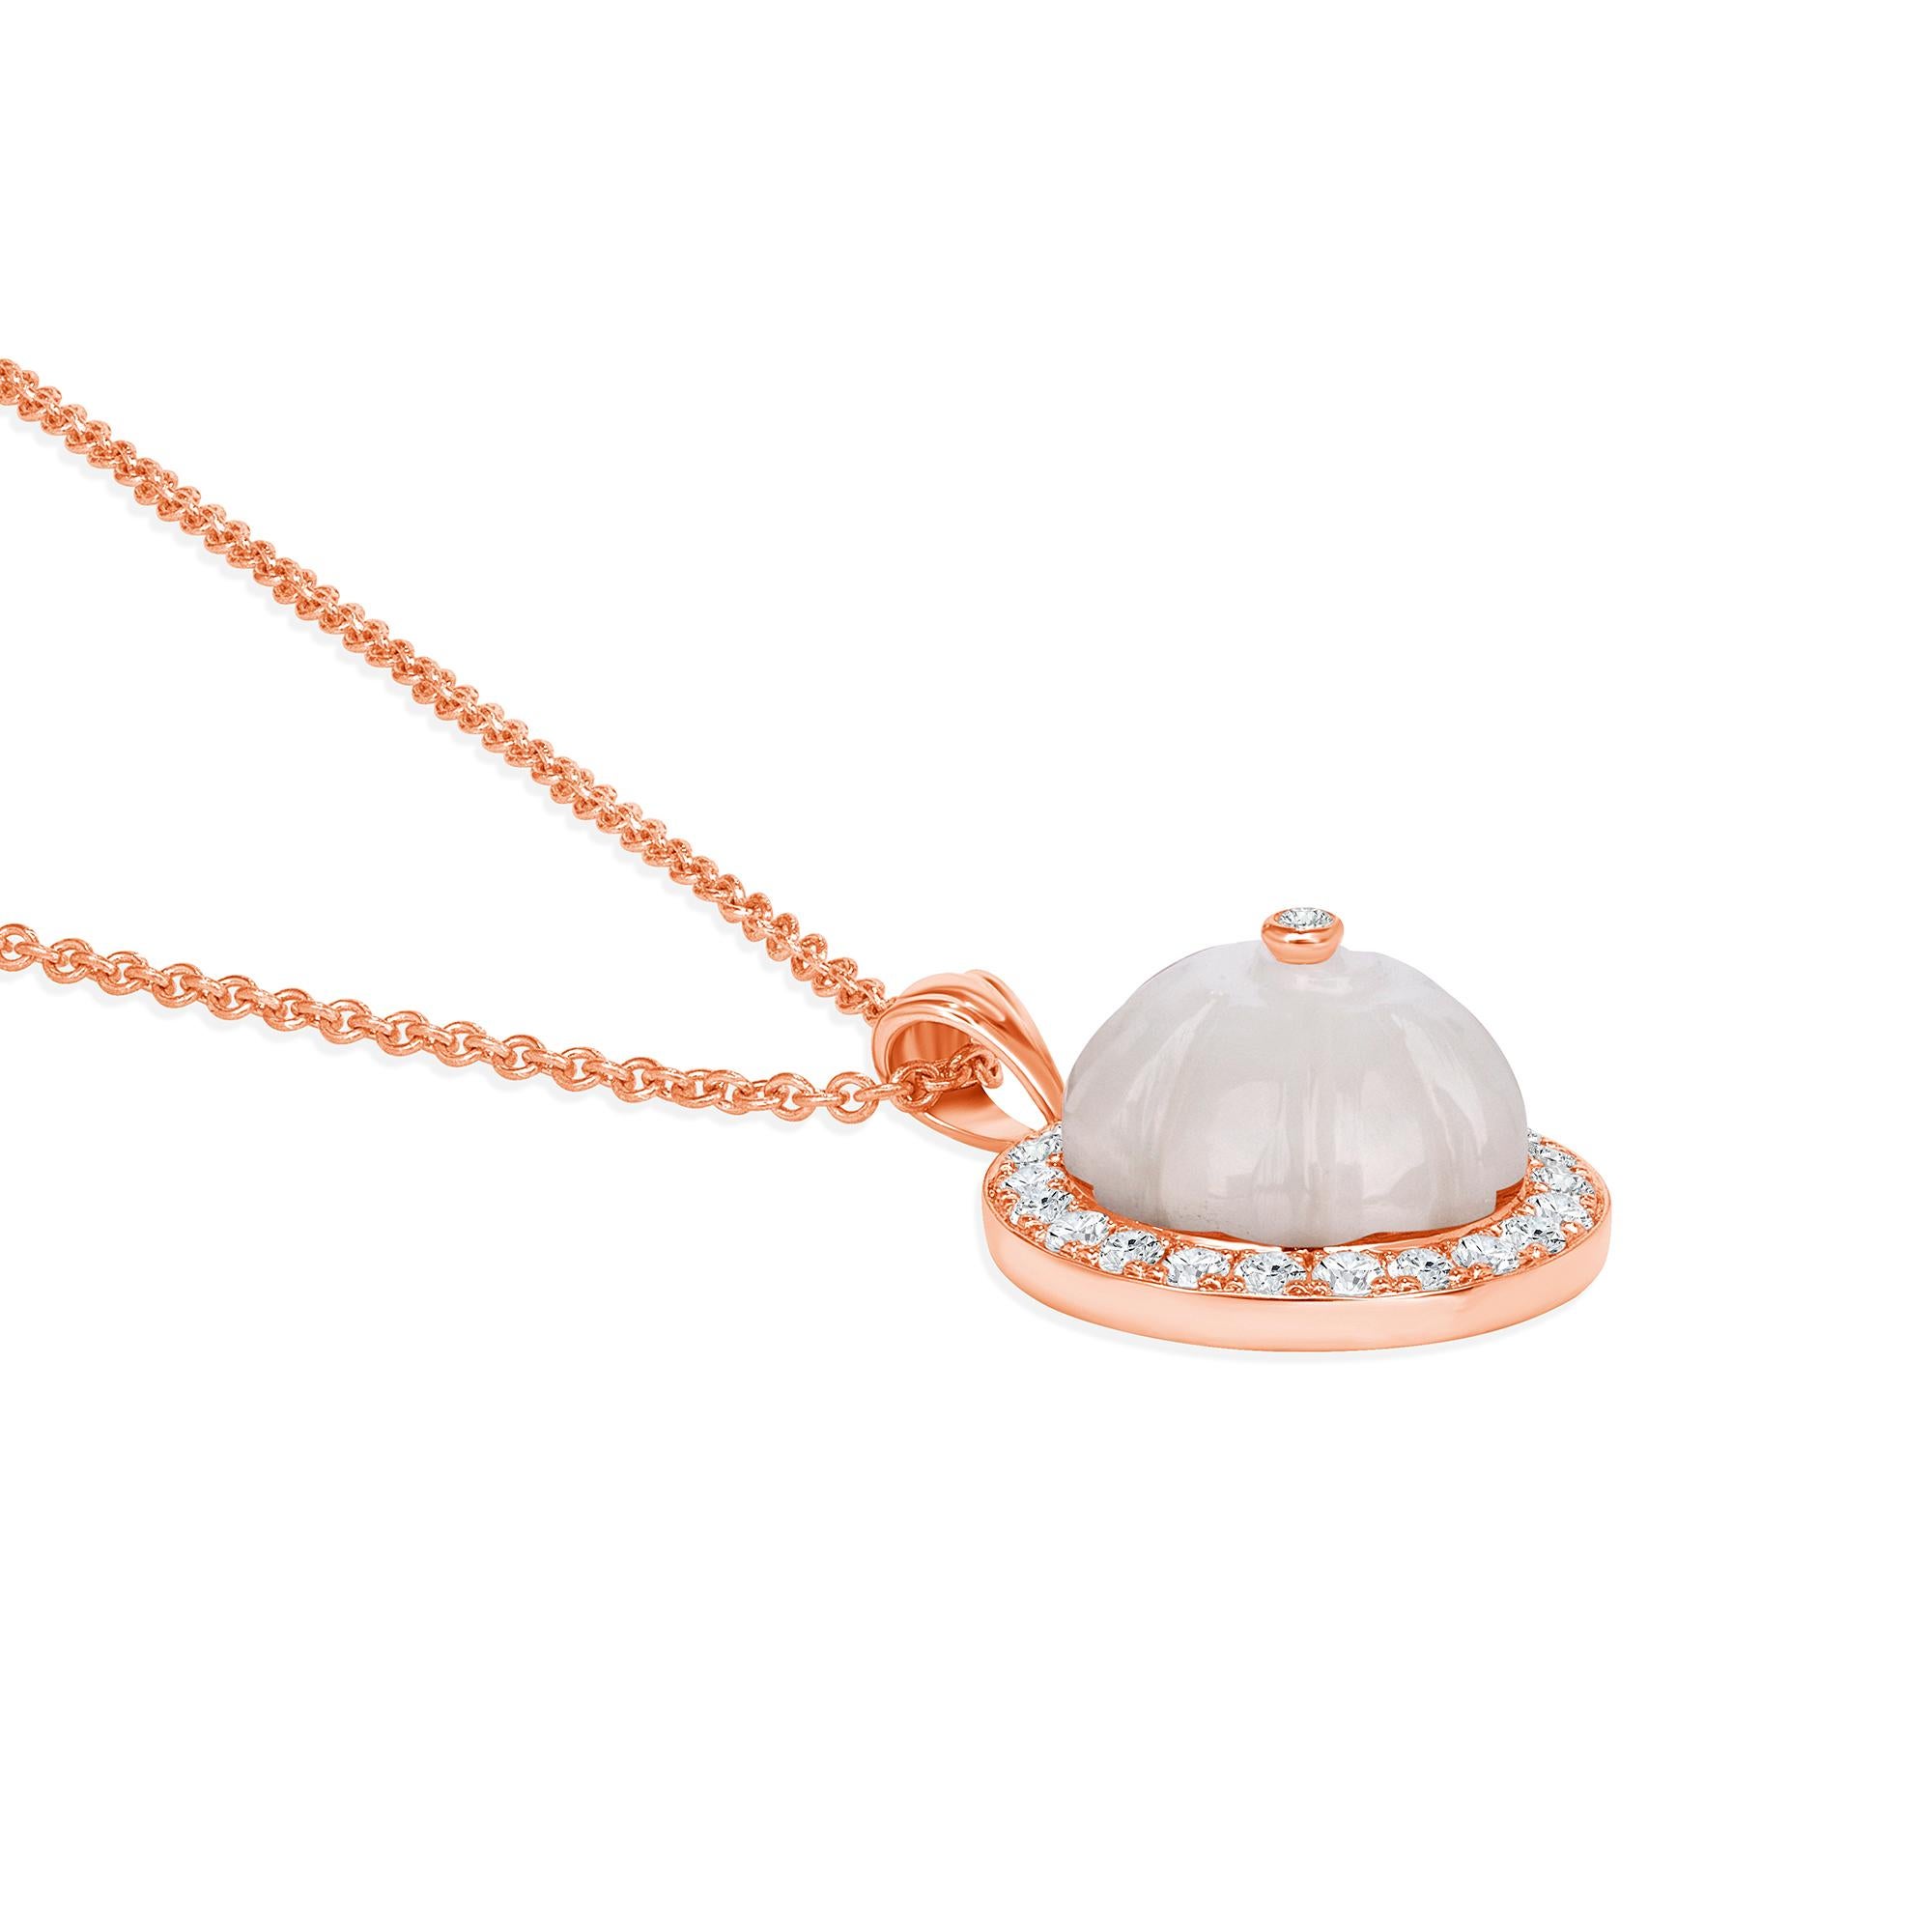 Indulge in the timeless allure of this pendant, expertly crafted in 14k gold and adorned with captivating mother-of-pearl stone and sparkling diamonds. Radiating elegance and charm, this pendant complements any outfit, seamlessly transitioning from